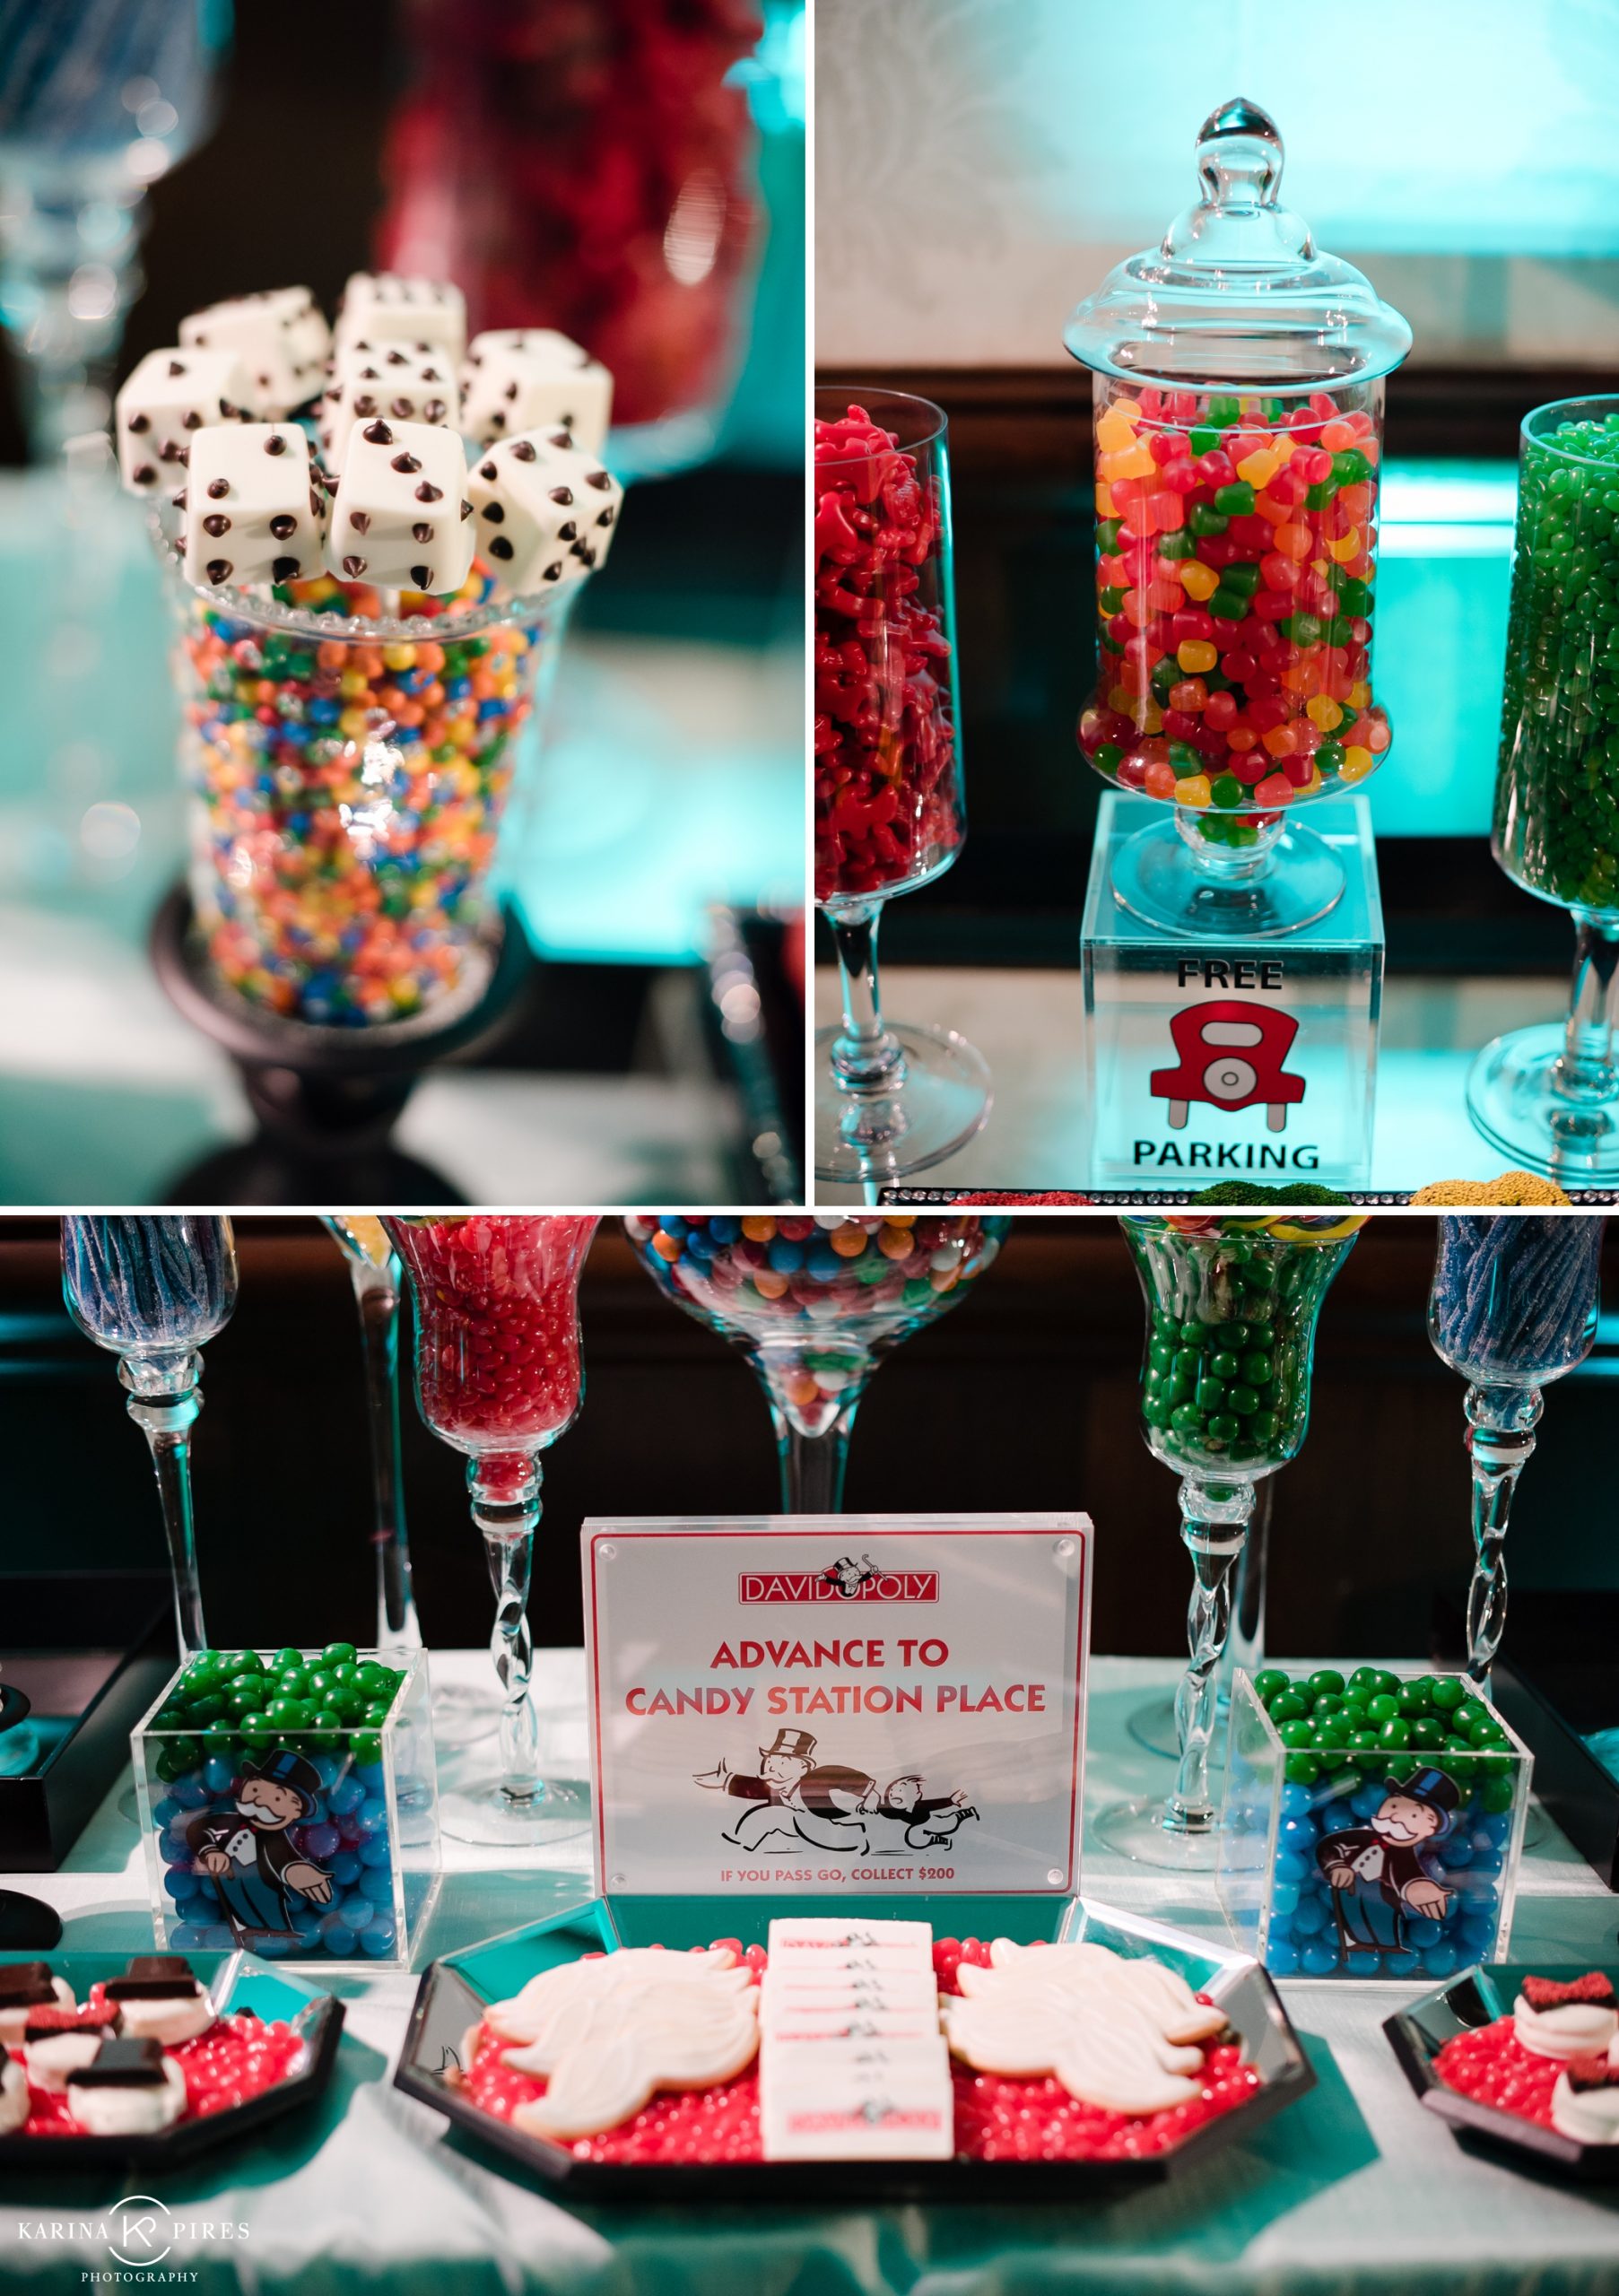 Monopoly Themed Bar Mitzvah Party | Karina Pires Photography